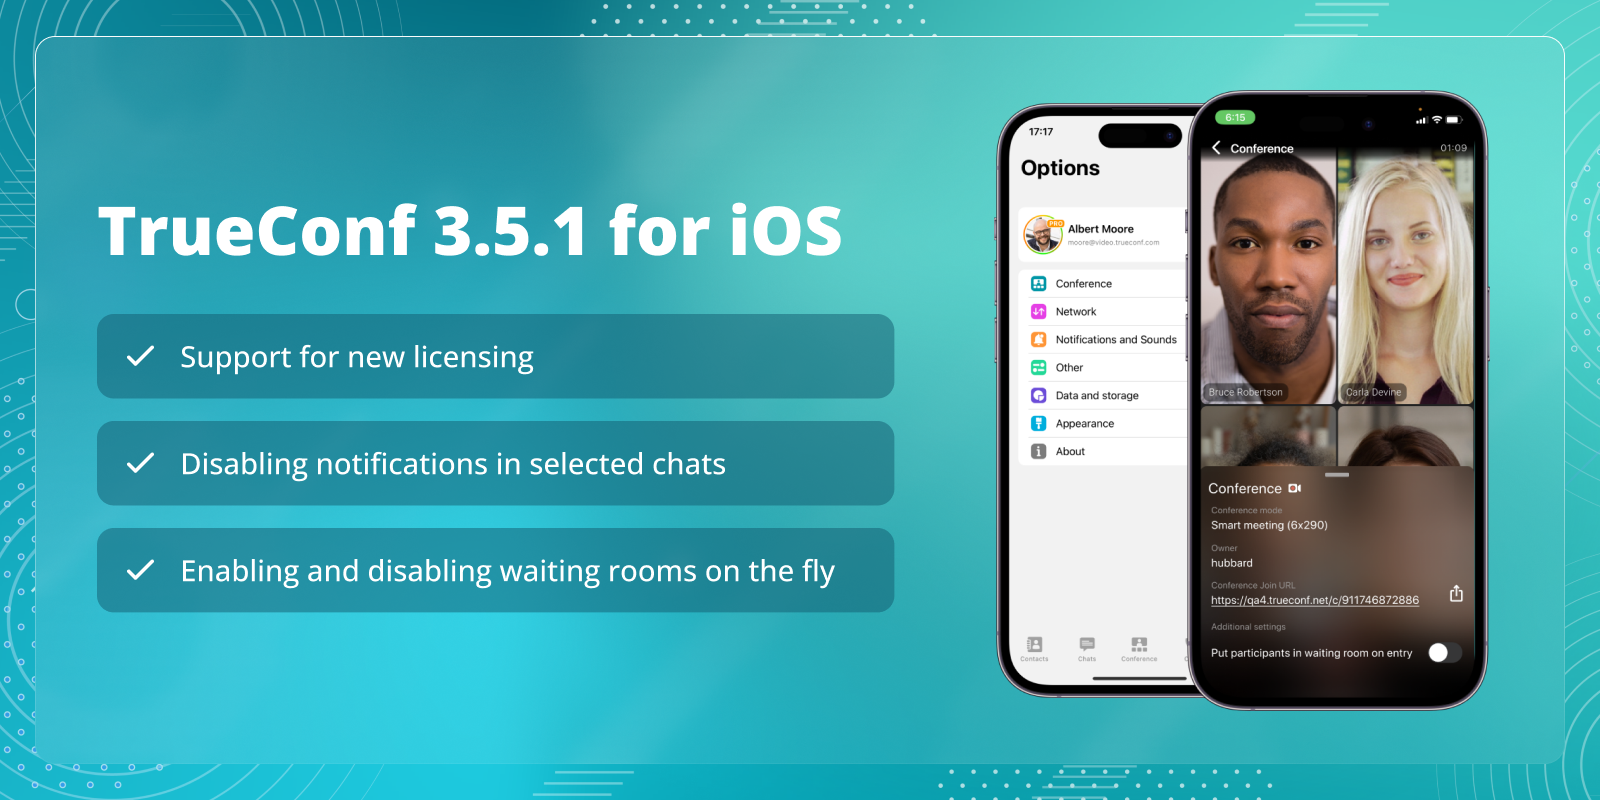 TrueConf 3.5.1 for iOS: support for new licensing and chats muting 4